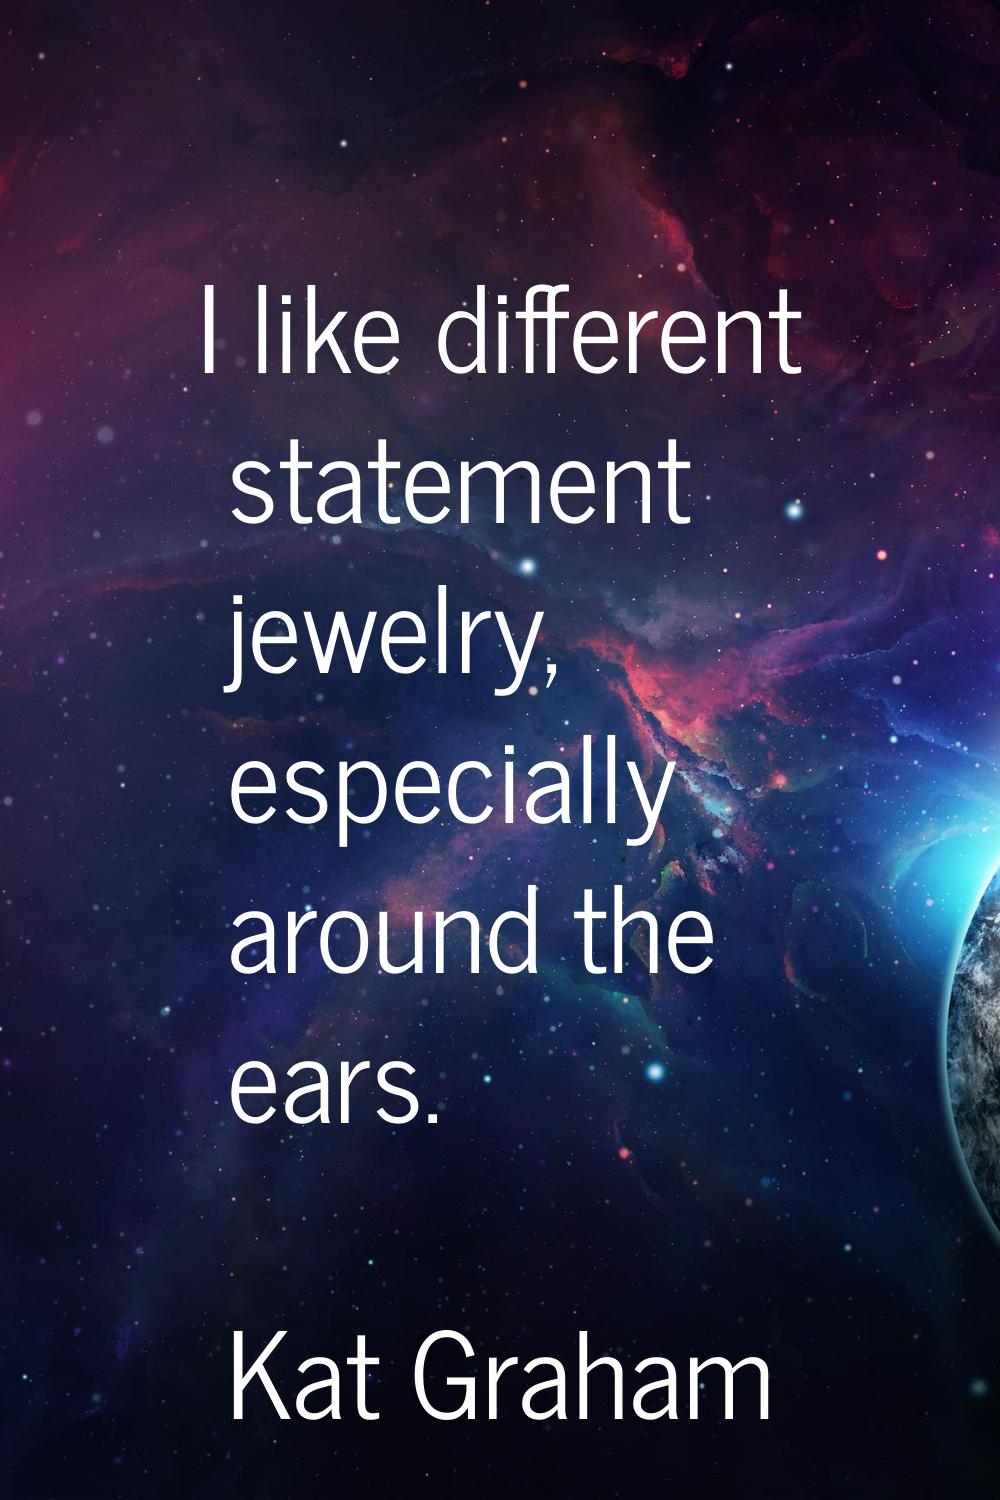 I like different statement jewelry, especially around the ears.